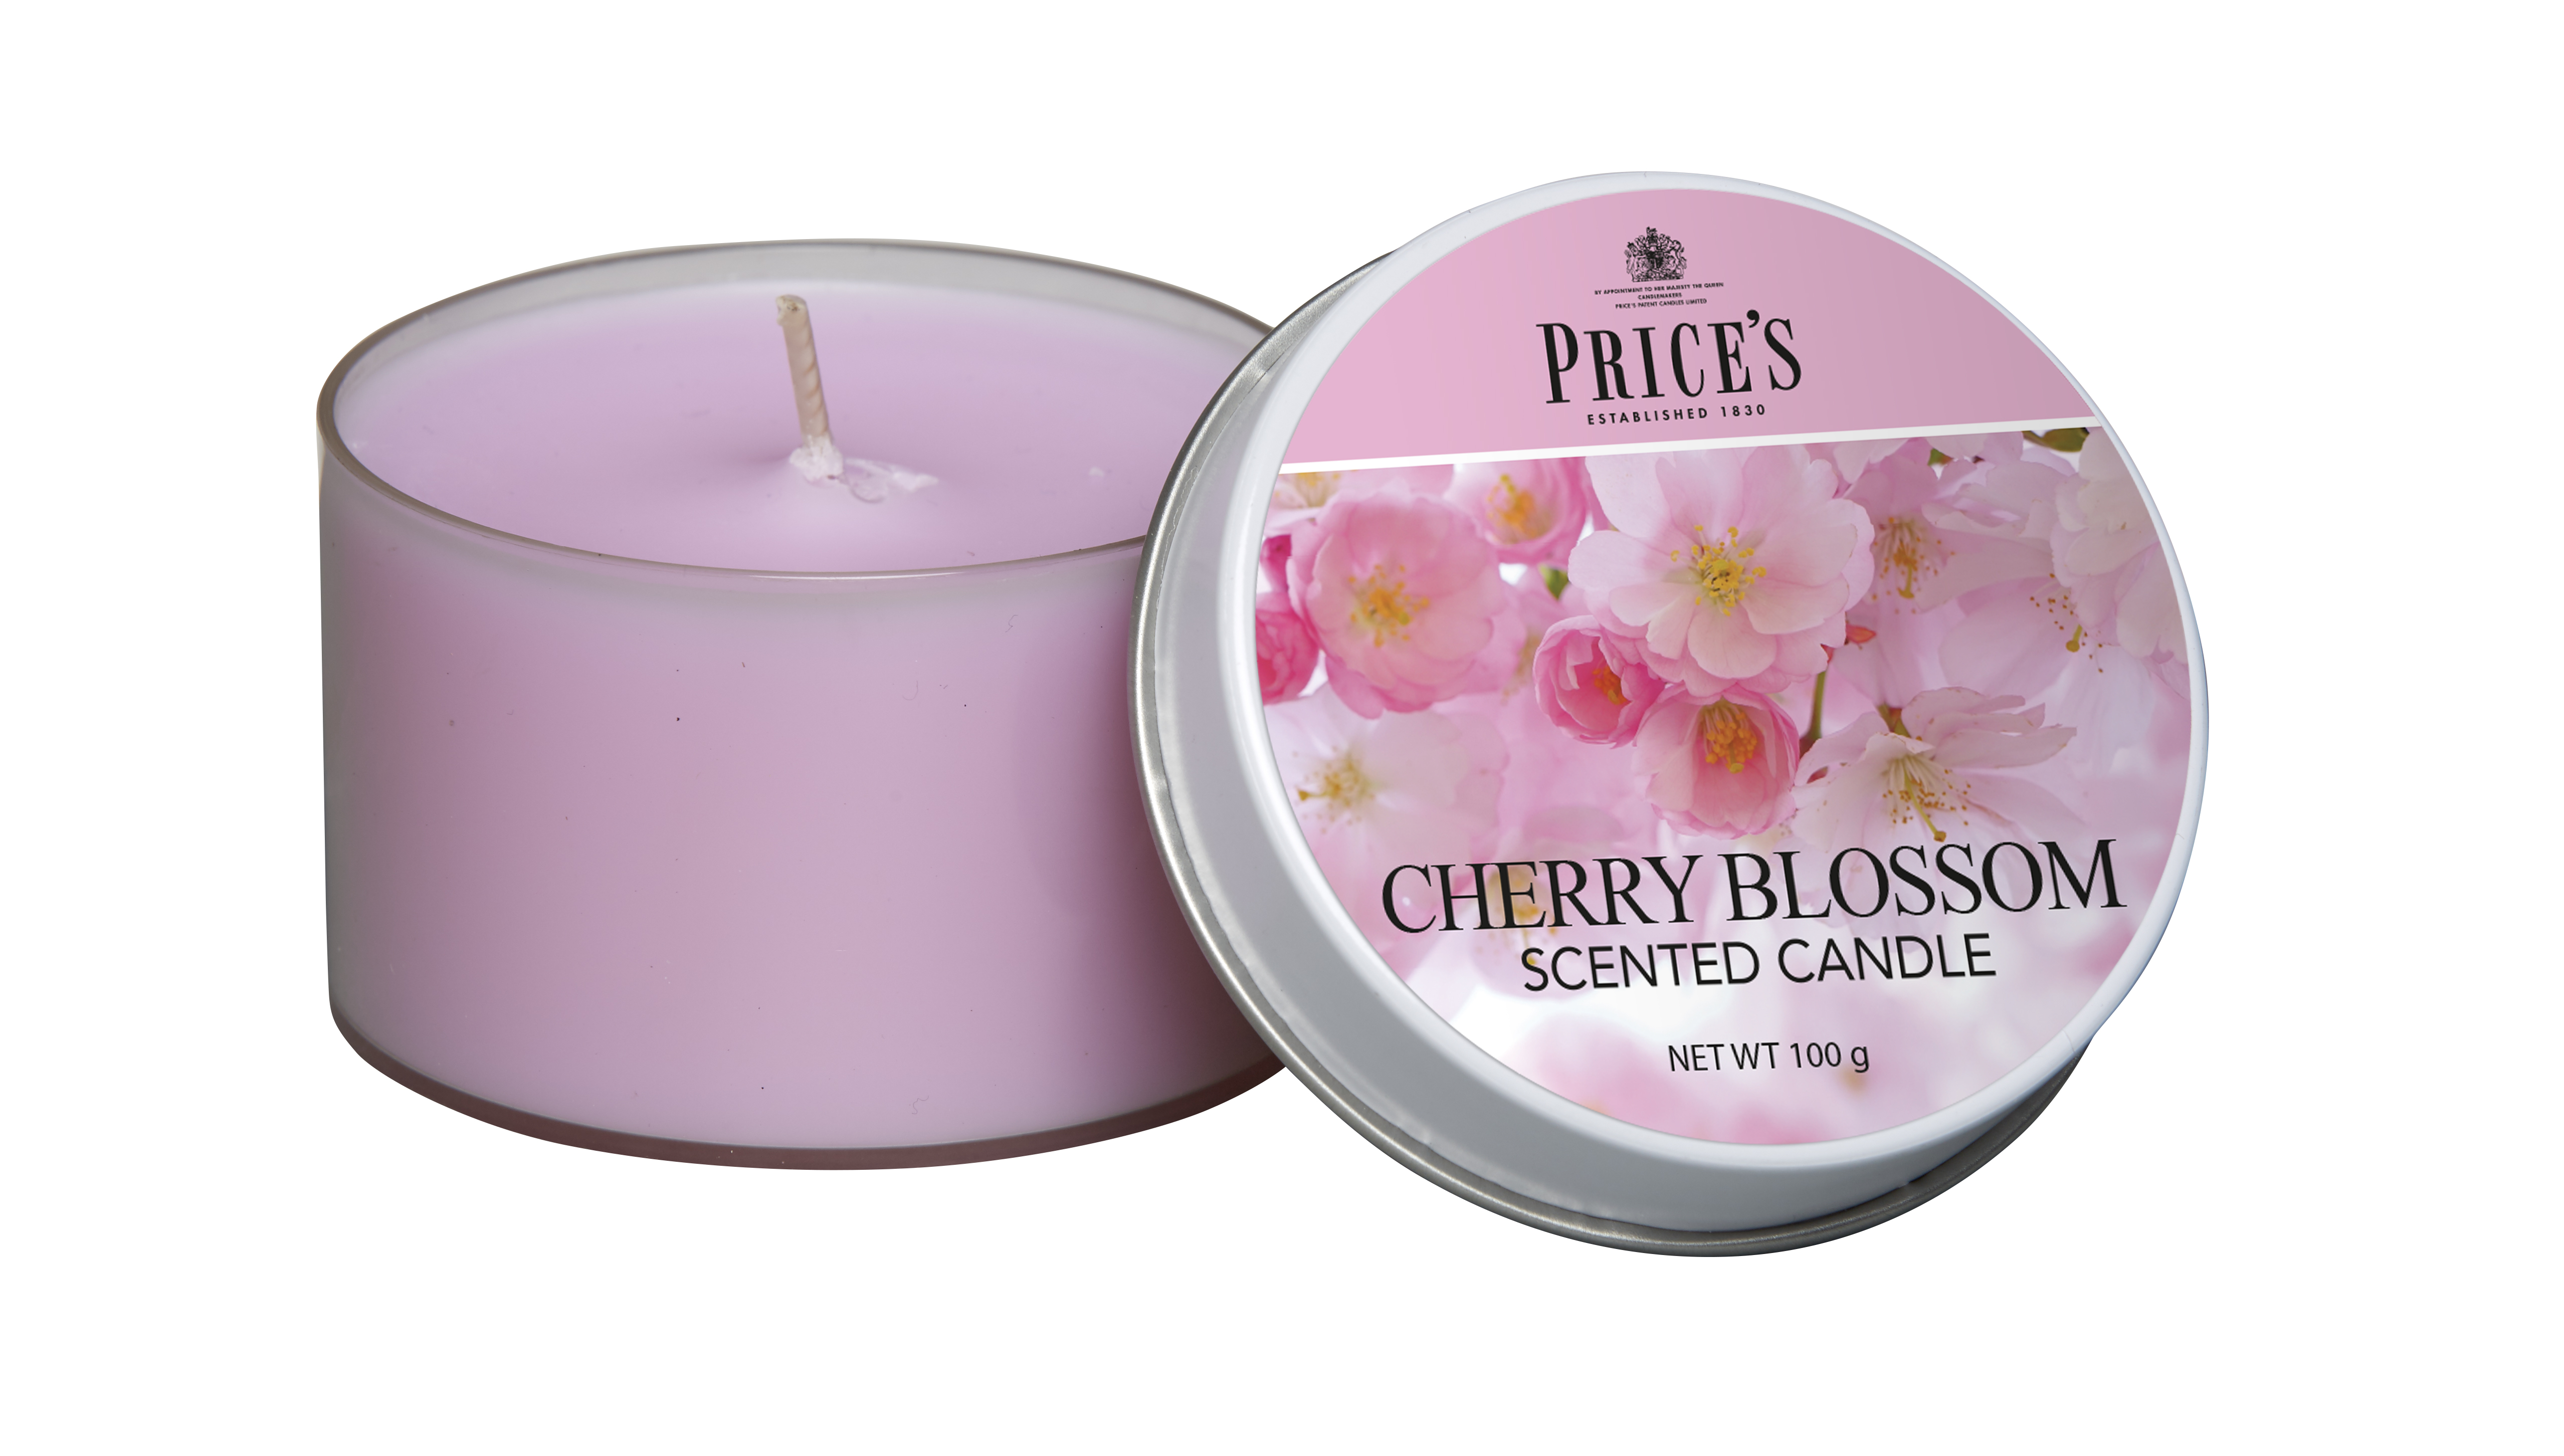 Prices Candle "Cherry Blossom" 100g    